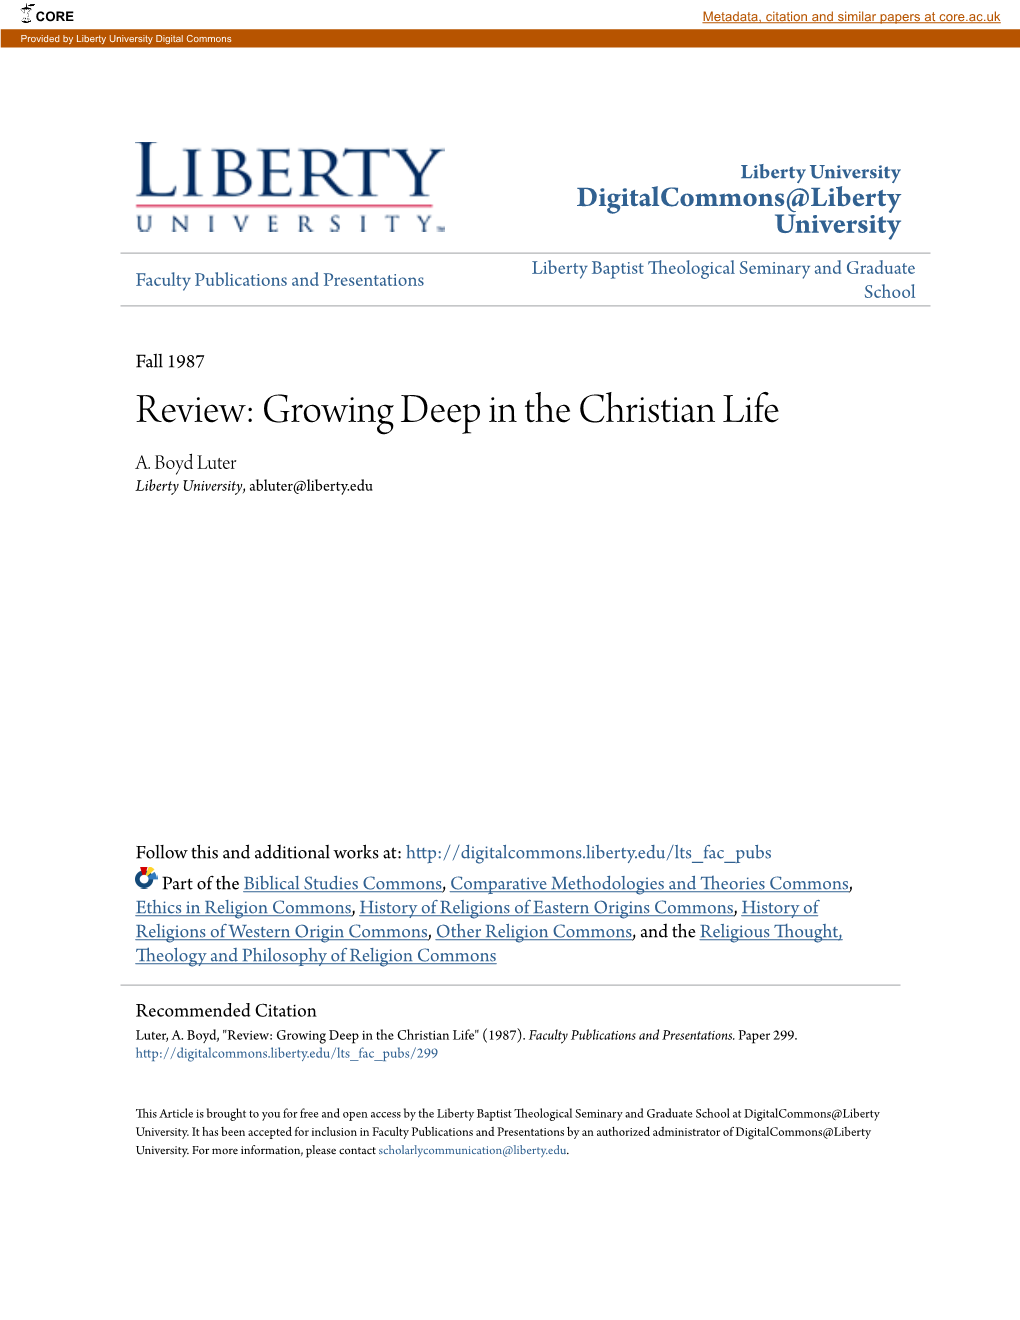 Growing Deep in the Christian Life A